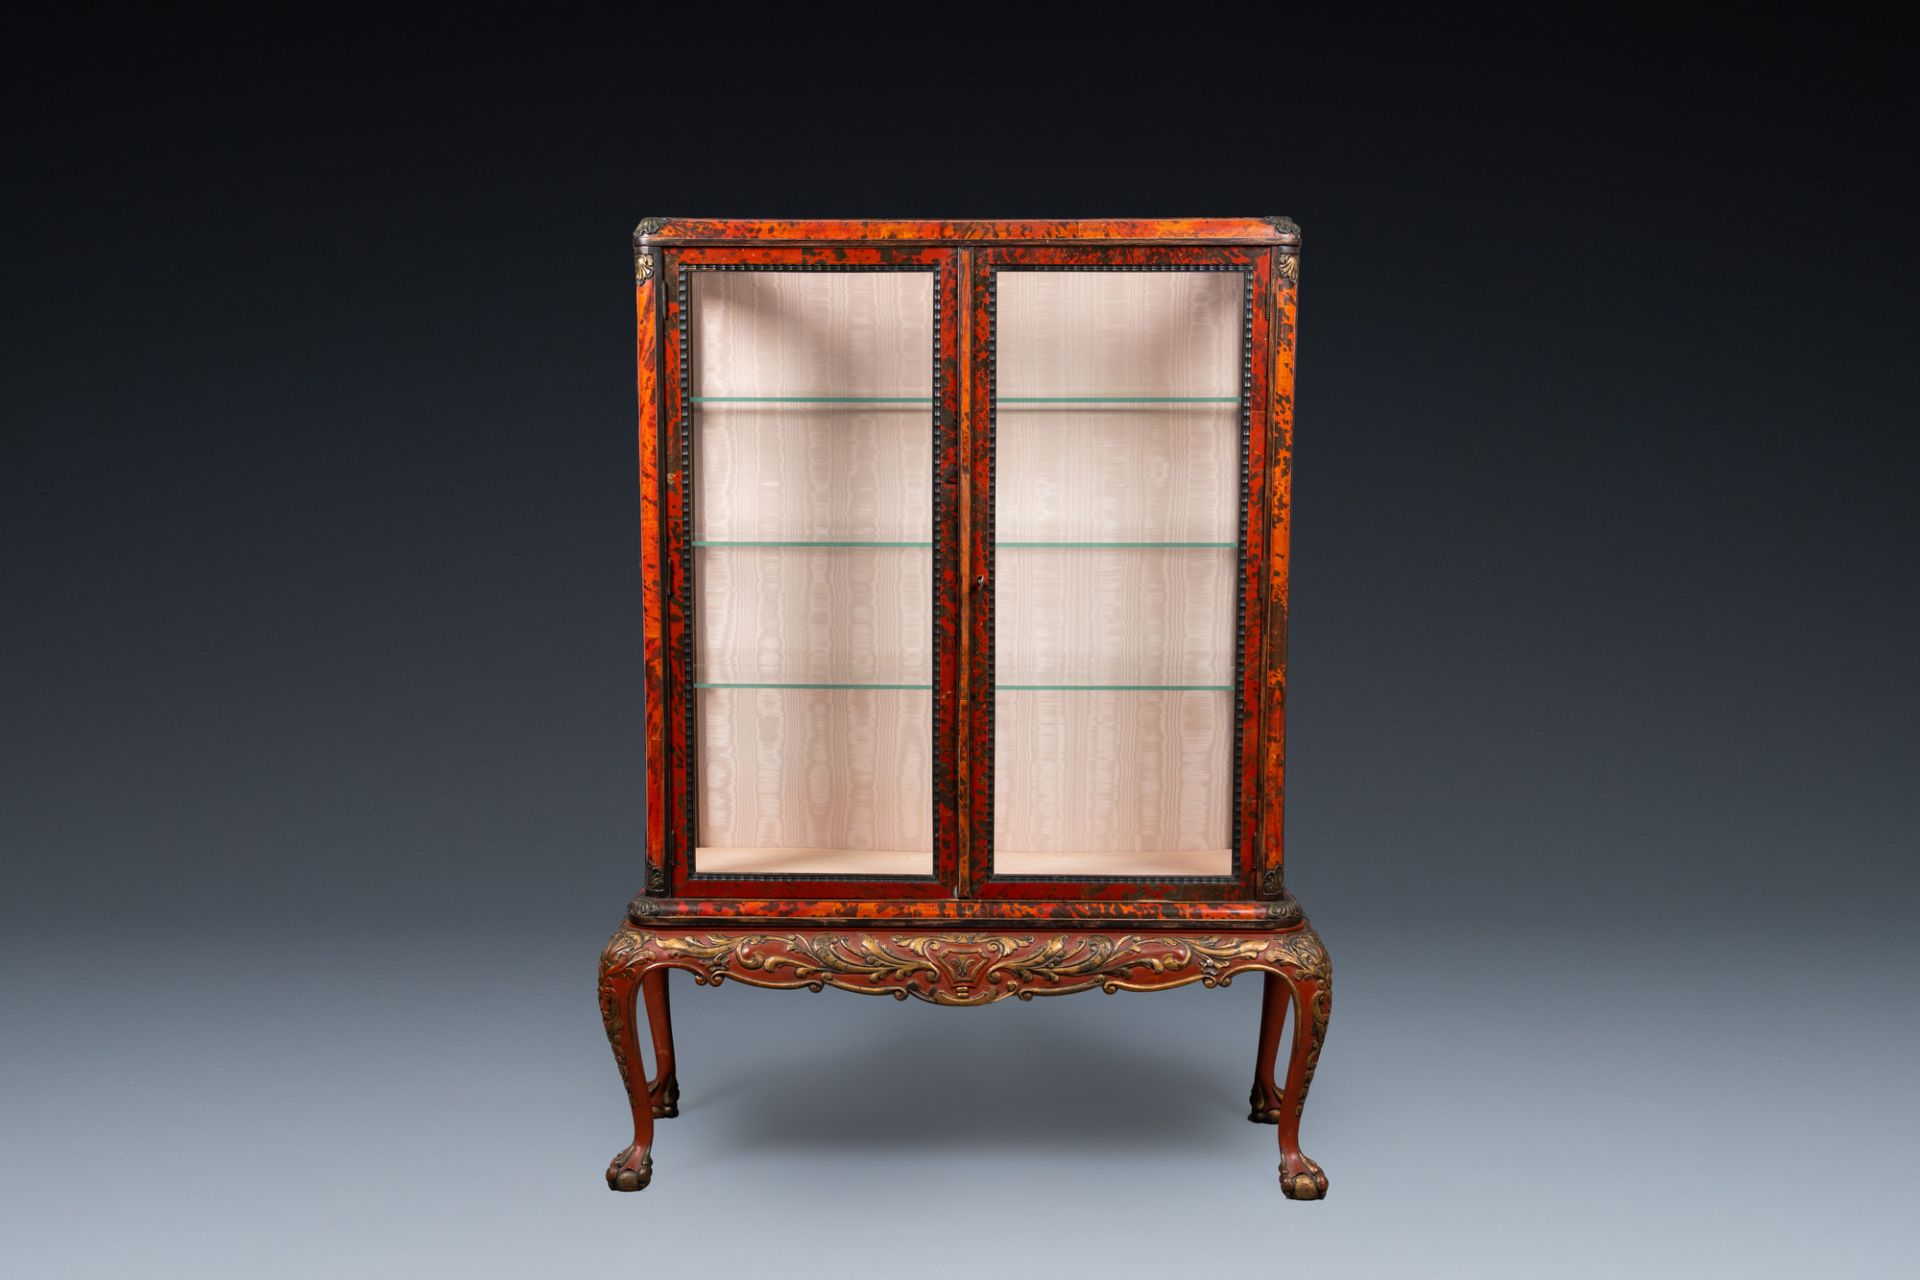 A tortoise veneer display cabinet on painted wooden stand, Maison Franck, Antwerp, ca. 1900 - Image 2 of 11